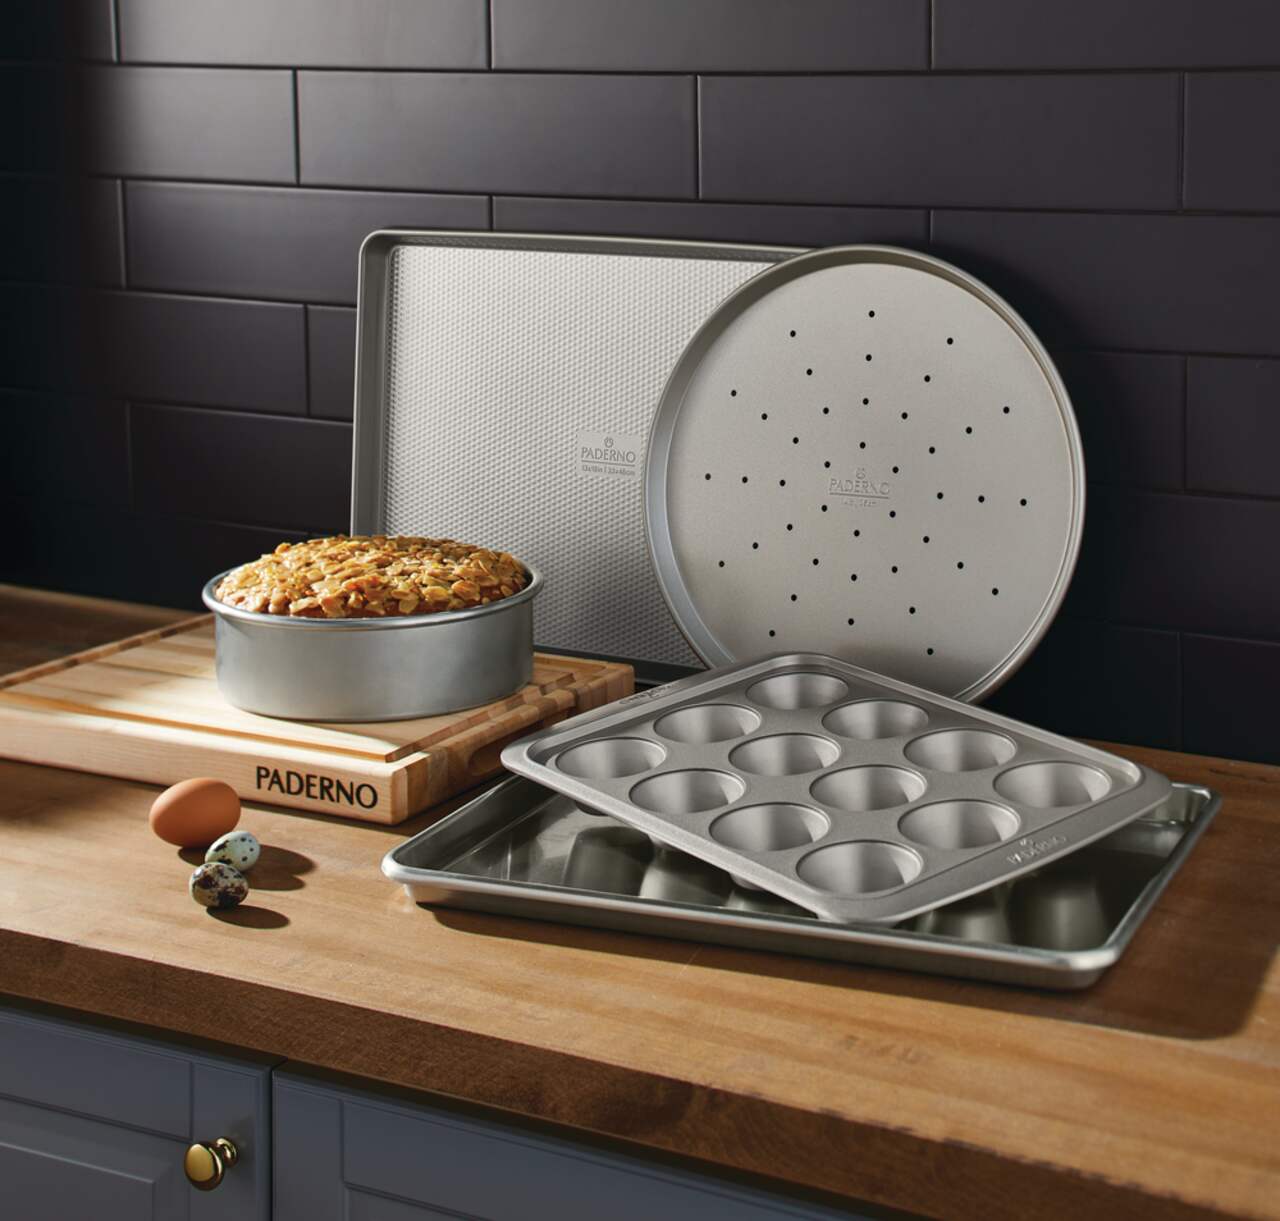 https://media-www.canadiantire.ca/product/living/kitchen/bakeware-baking-prep/1424873/paderno-professional-uncoated-aluminum-12-cup-muffin-pan-0f8b86ad-4a3f-47f6-9ebc-5886656bf66c.png?imdensity=1&imwidth=1244&impolicy=mZoom